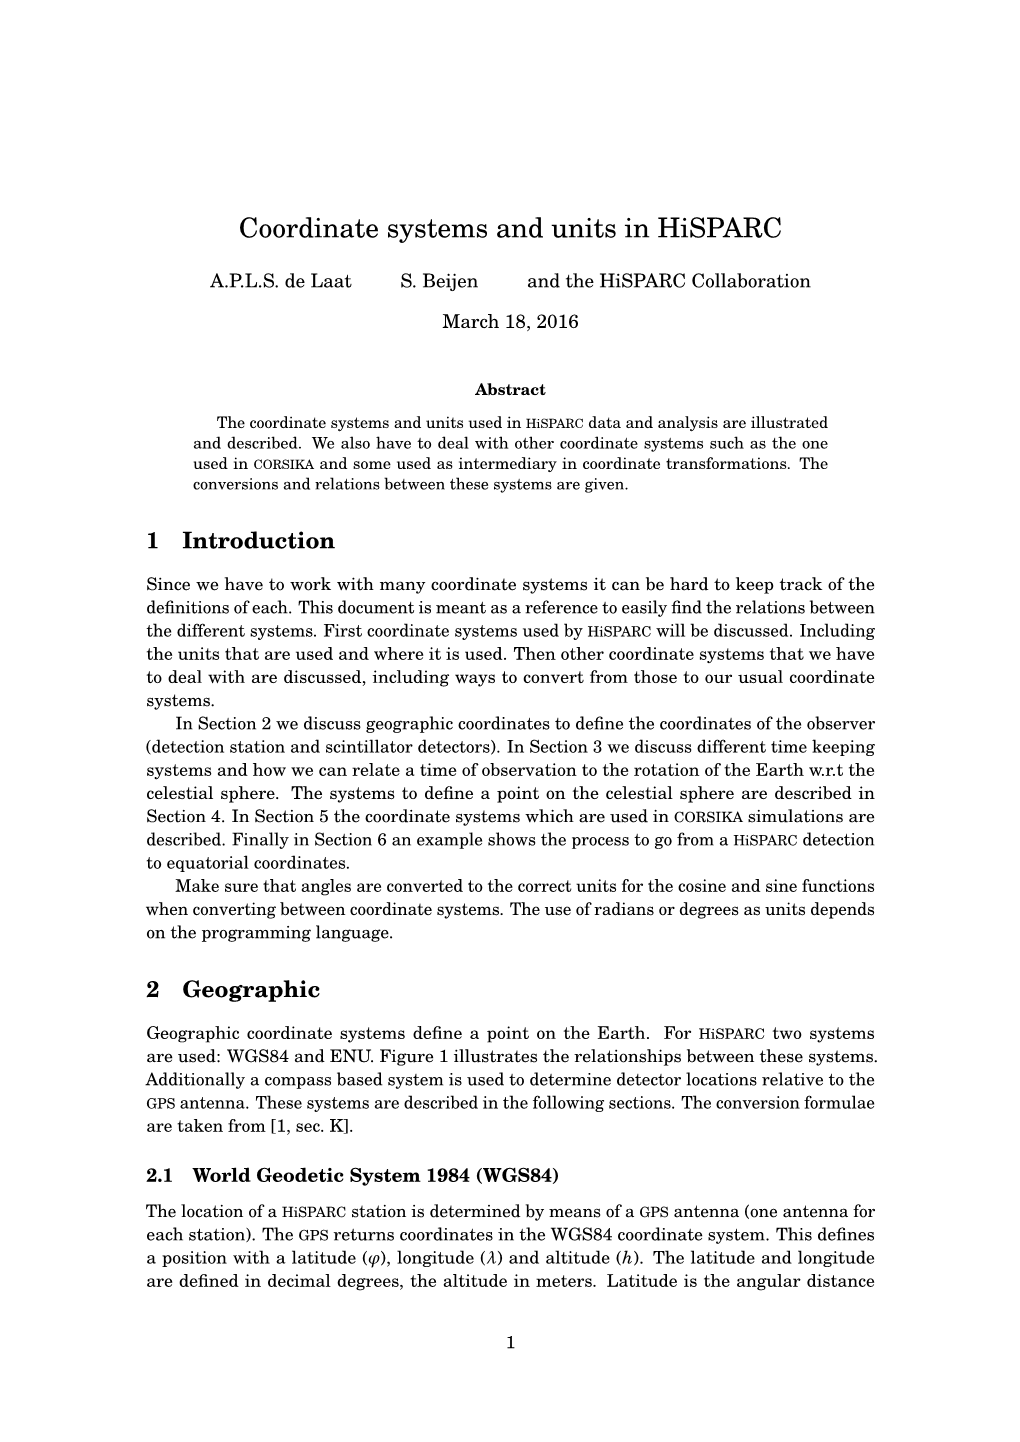 Coordinate Systems and Units in Hisparc